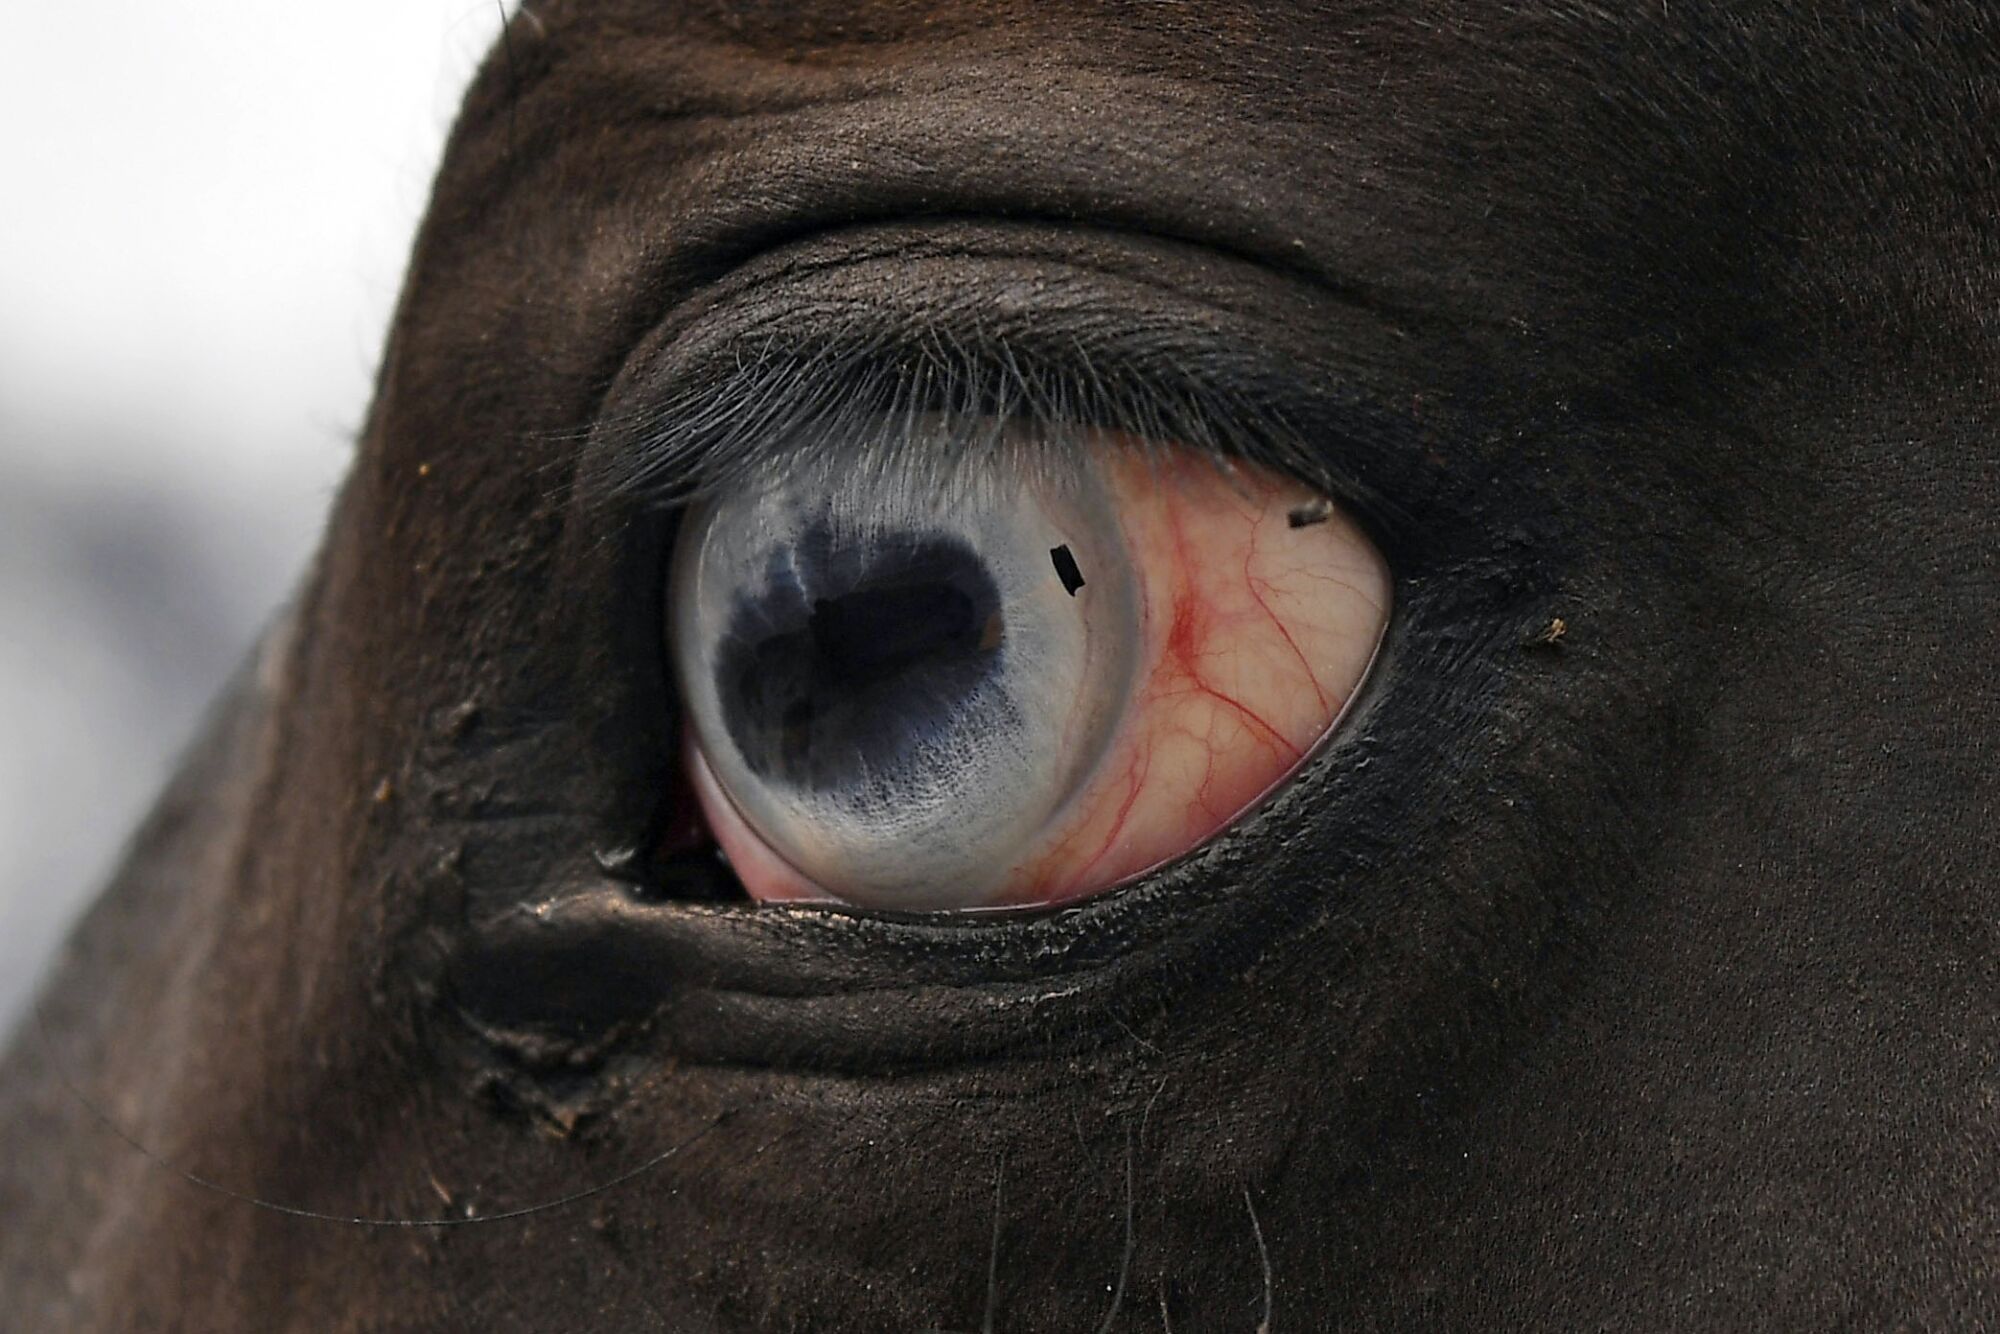 Debris from a fire is seen in the eye of a horse in Vacaville, Calif.